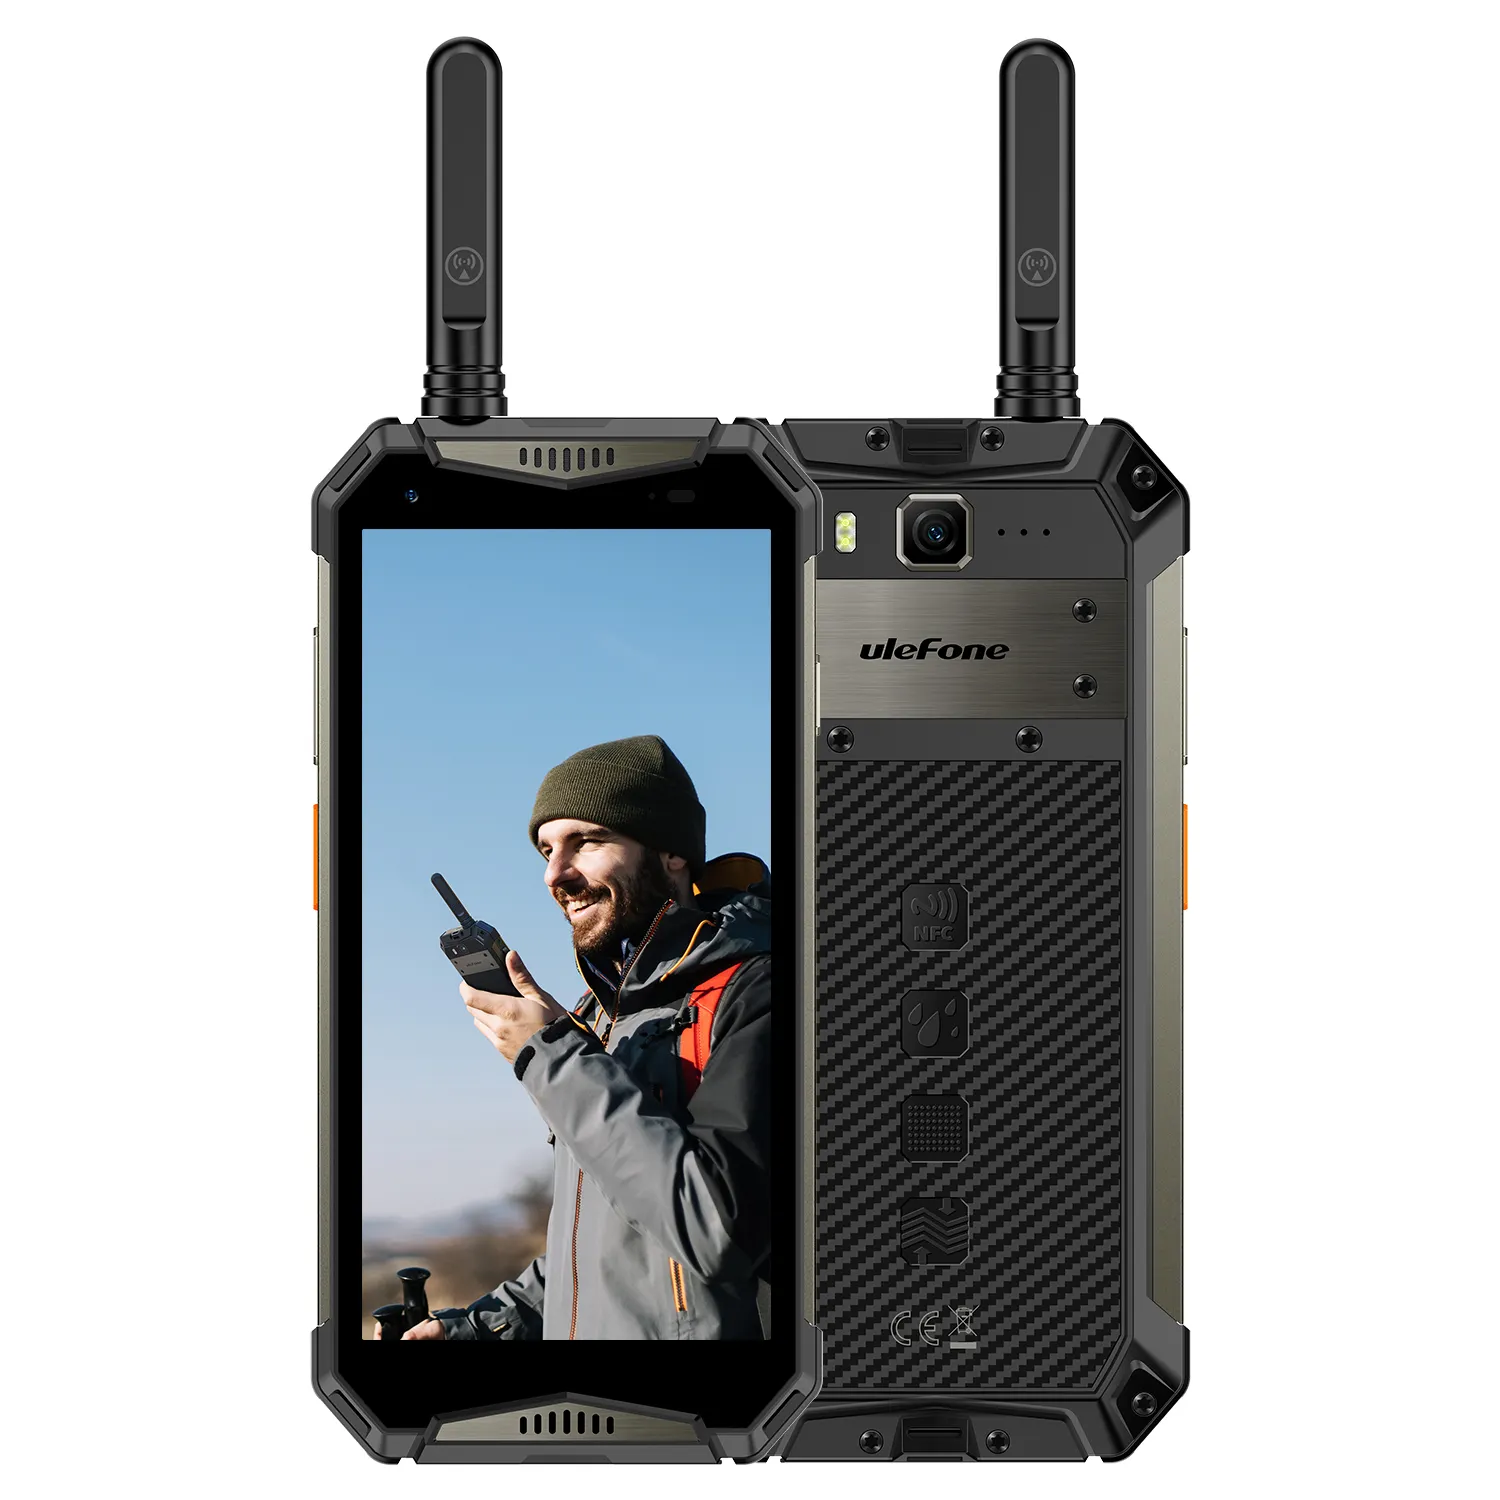 Commercio all'ingrosso ulefone Armor 20WT Big Memory 20g + 256g cellulare 50MP cellulare walkie-talkie Smartphone robusto